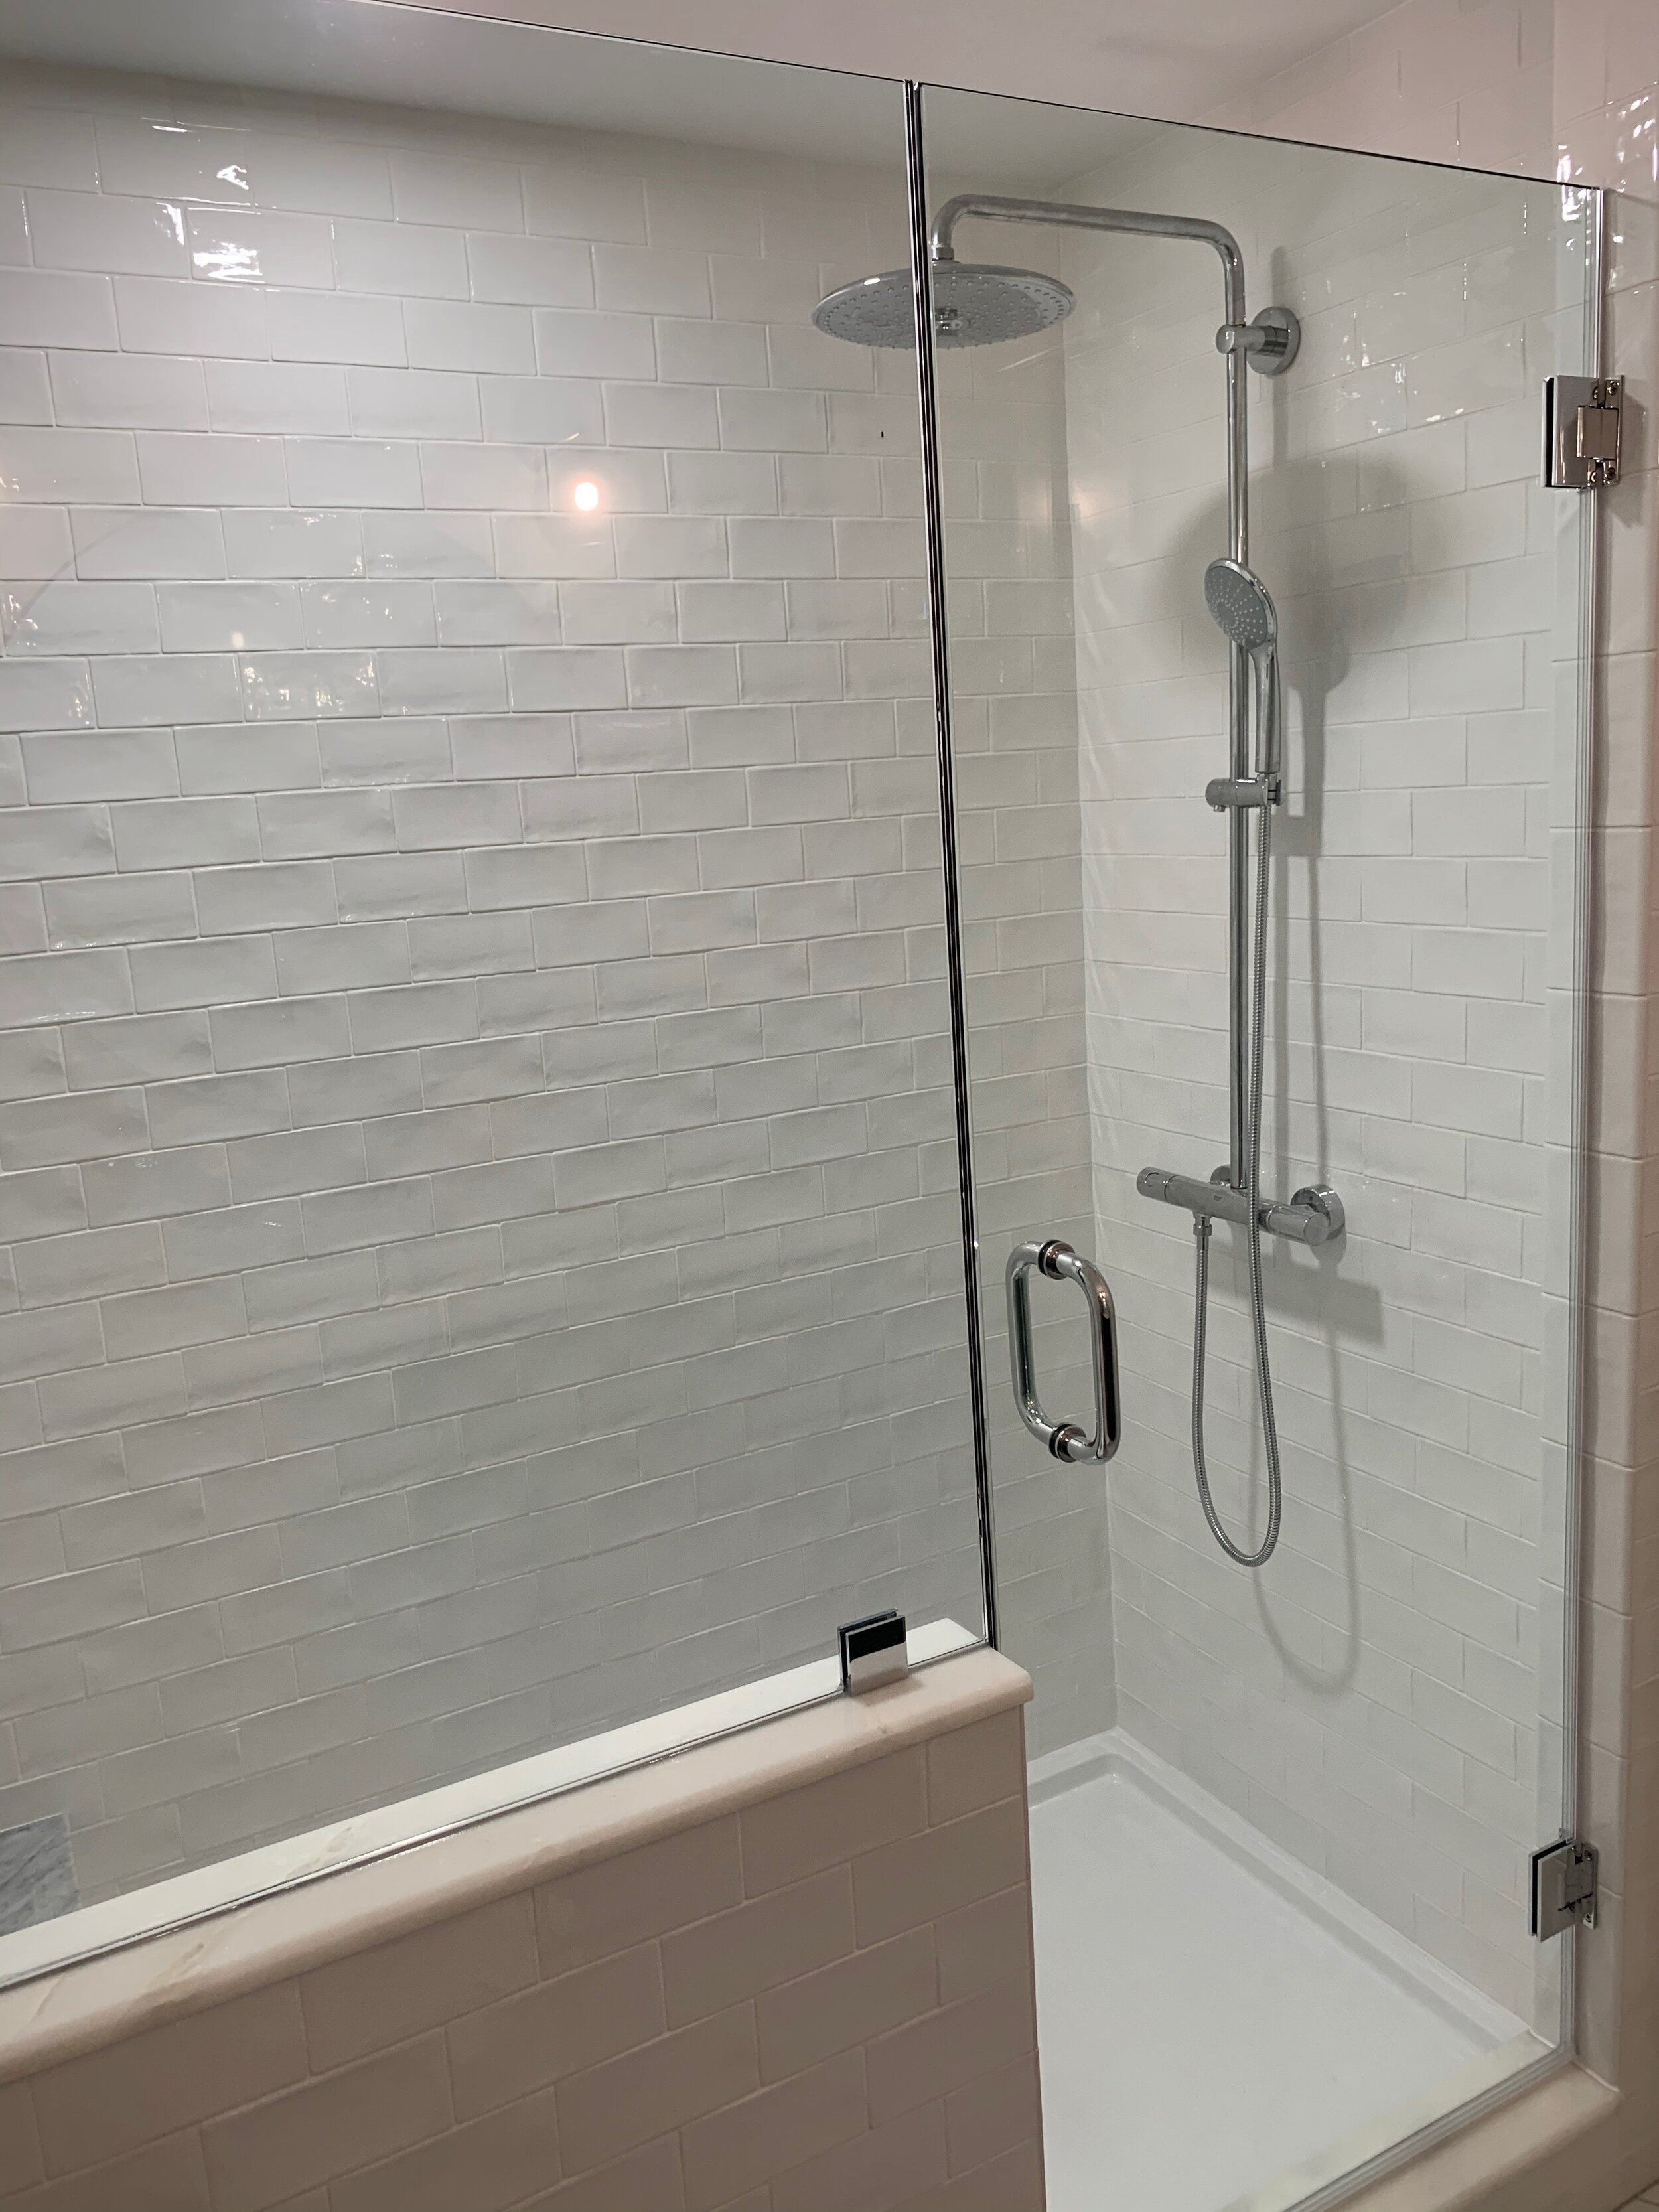  Full Bathroom Remodel:  New Plumbing, Glass Shower, and Wall and Floor Tiles 